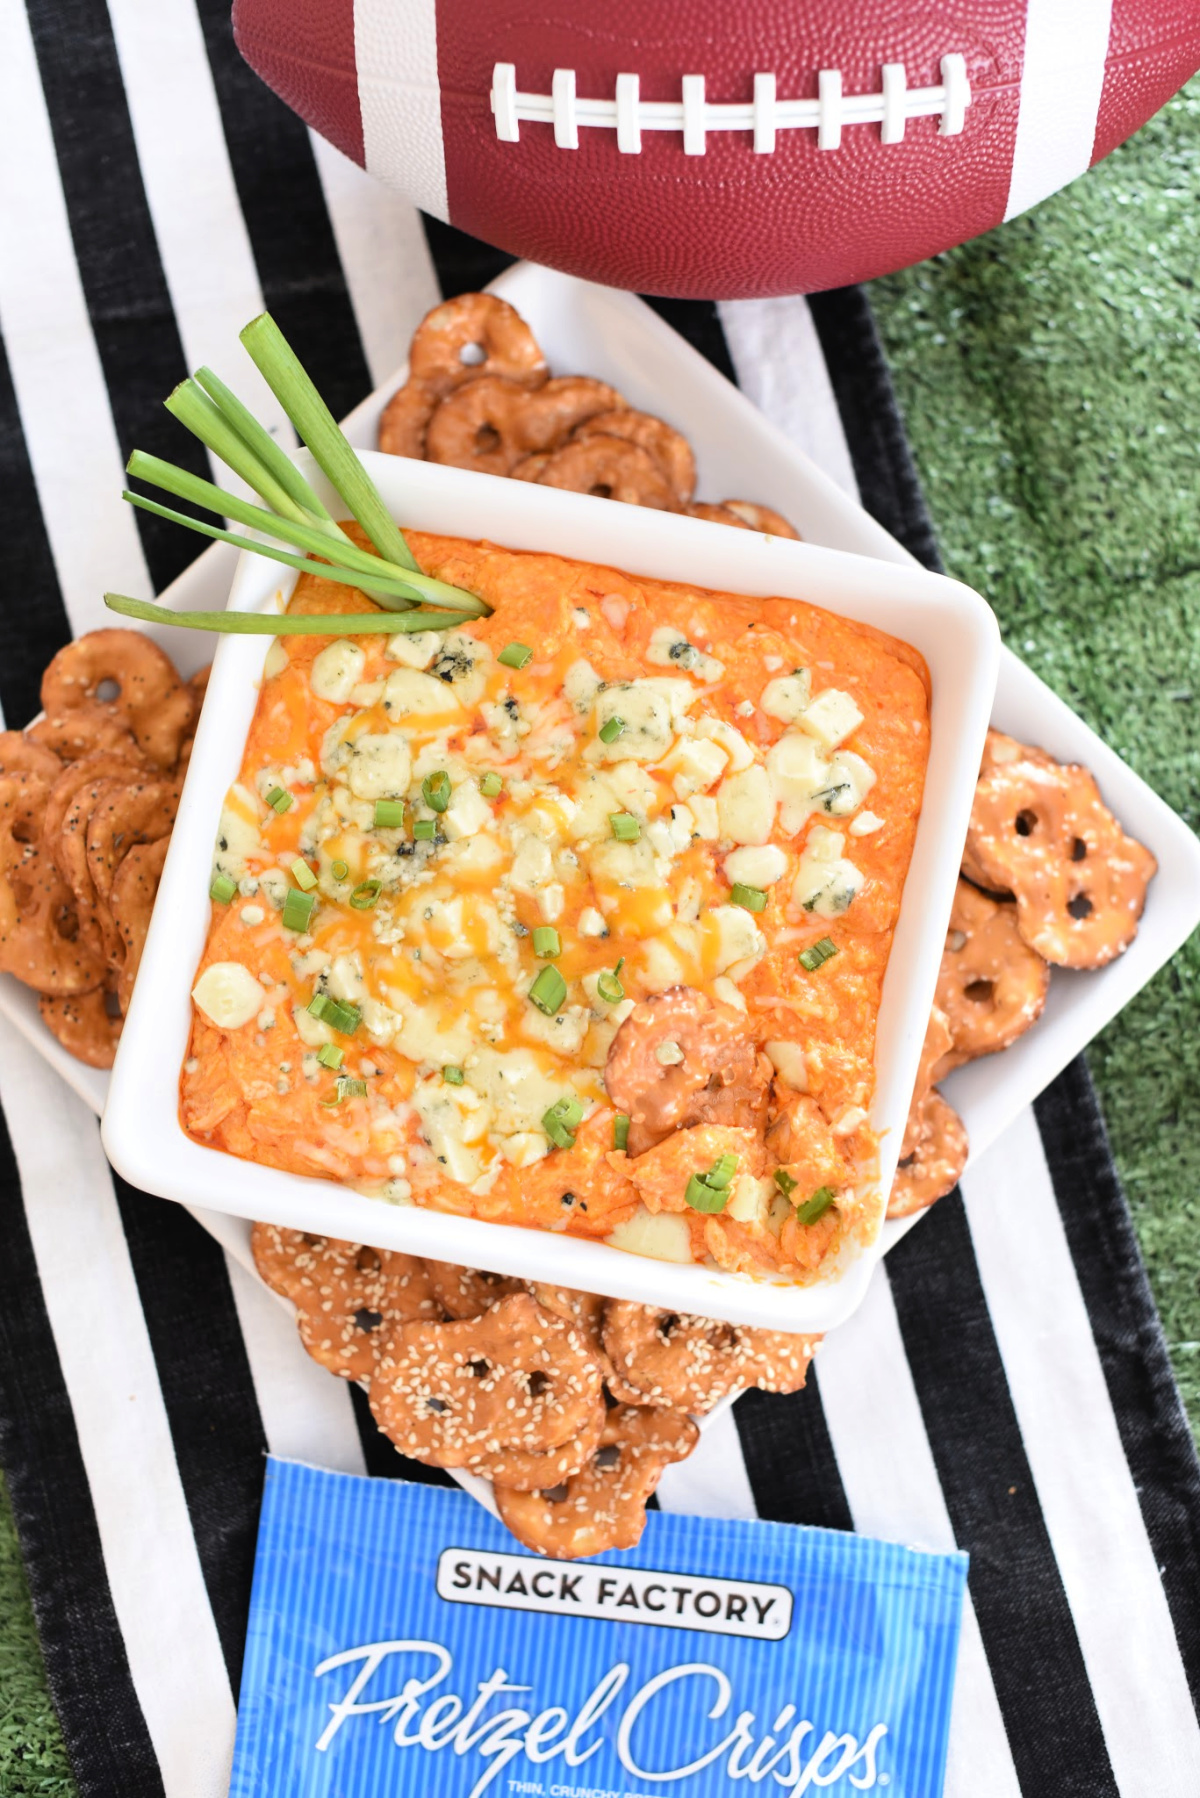 This game day buffalo dip is the perfect addition to any football party! This buffalo dip is quick and simple, and tastes amazing! #gamedayfood #buffalodip #footballpartyfood #fundipideas